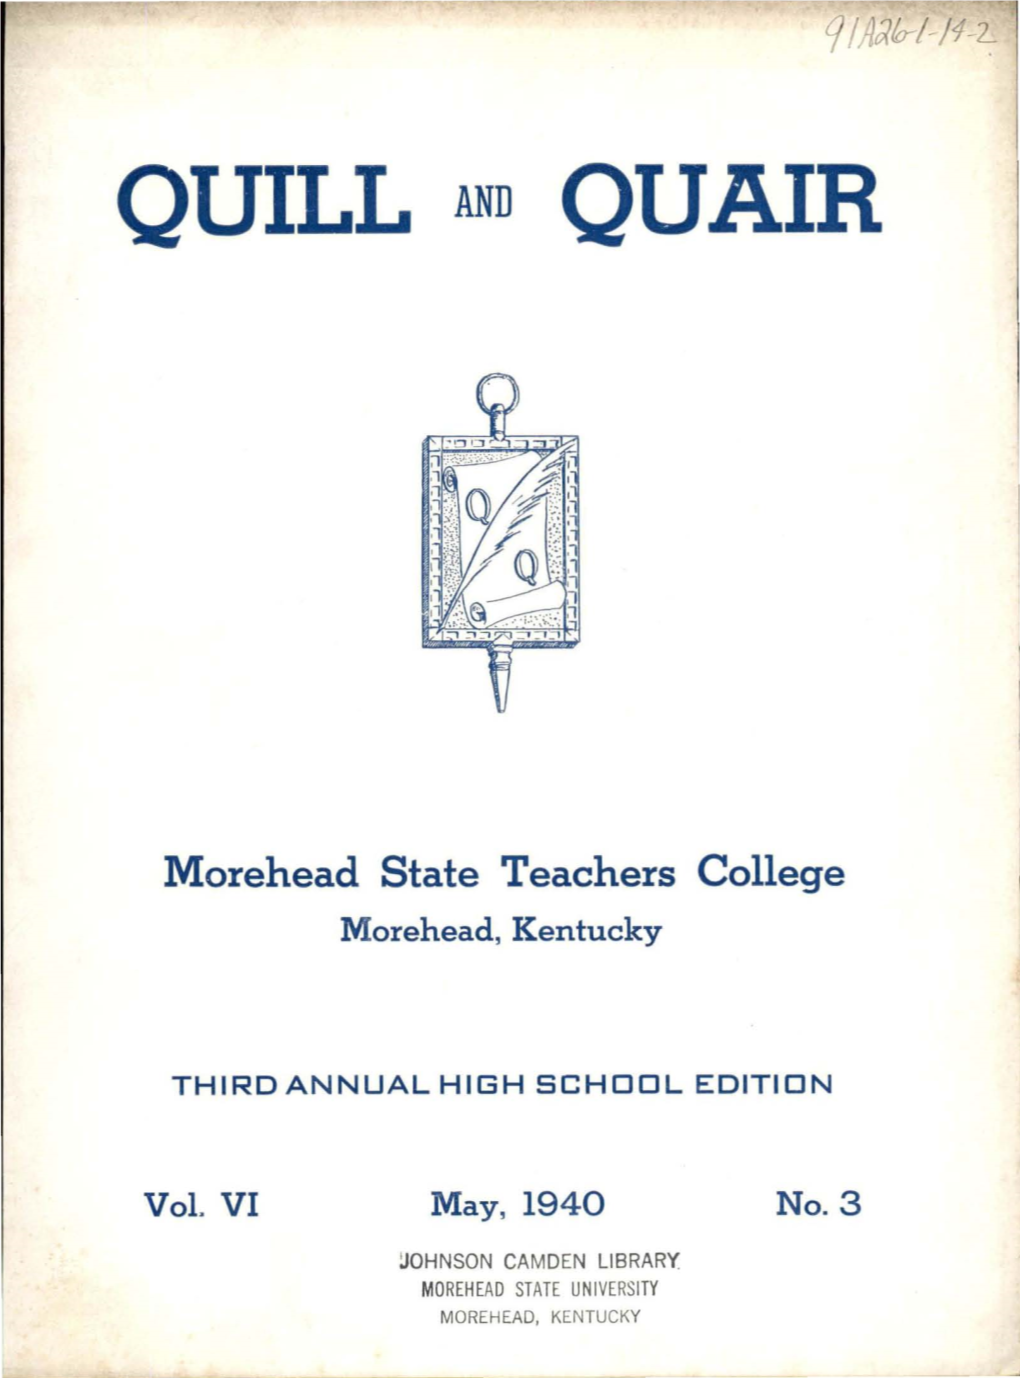 Quill and Quair